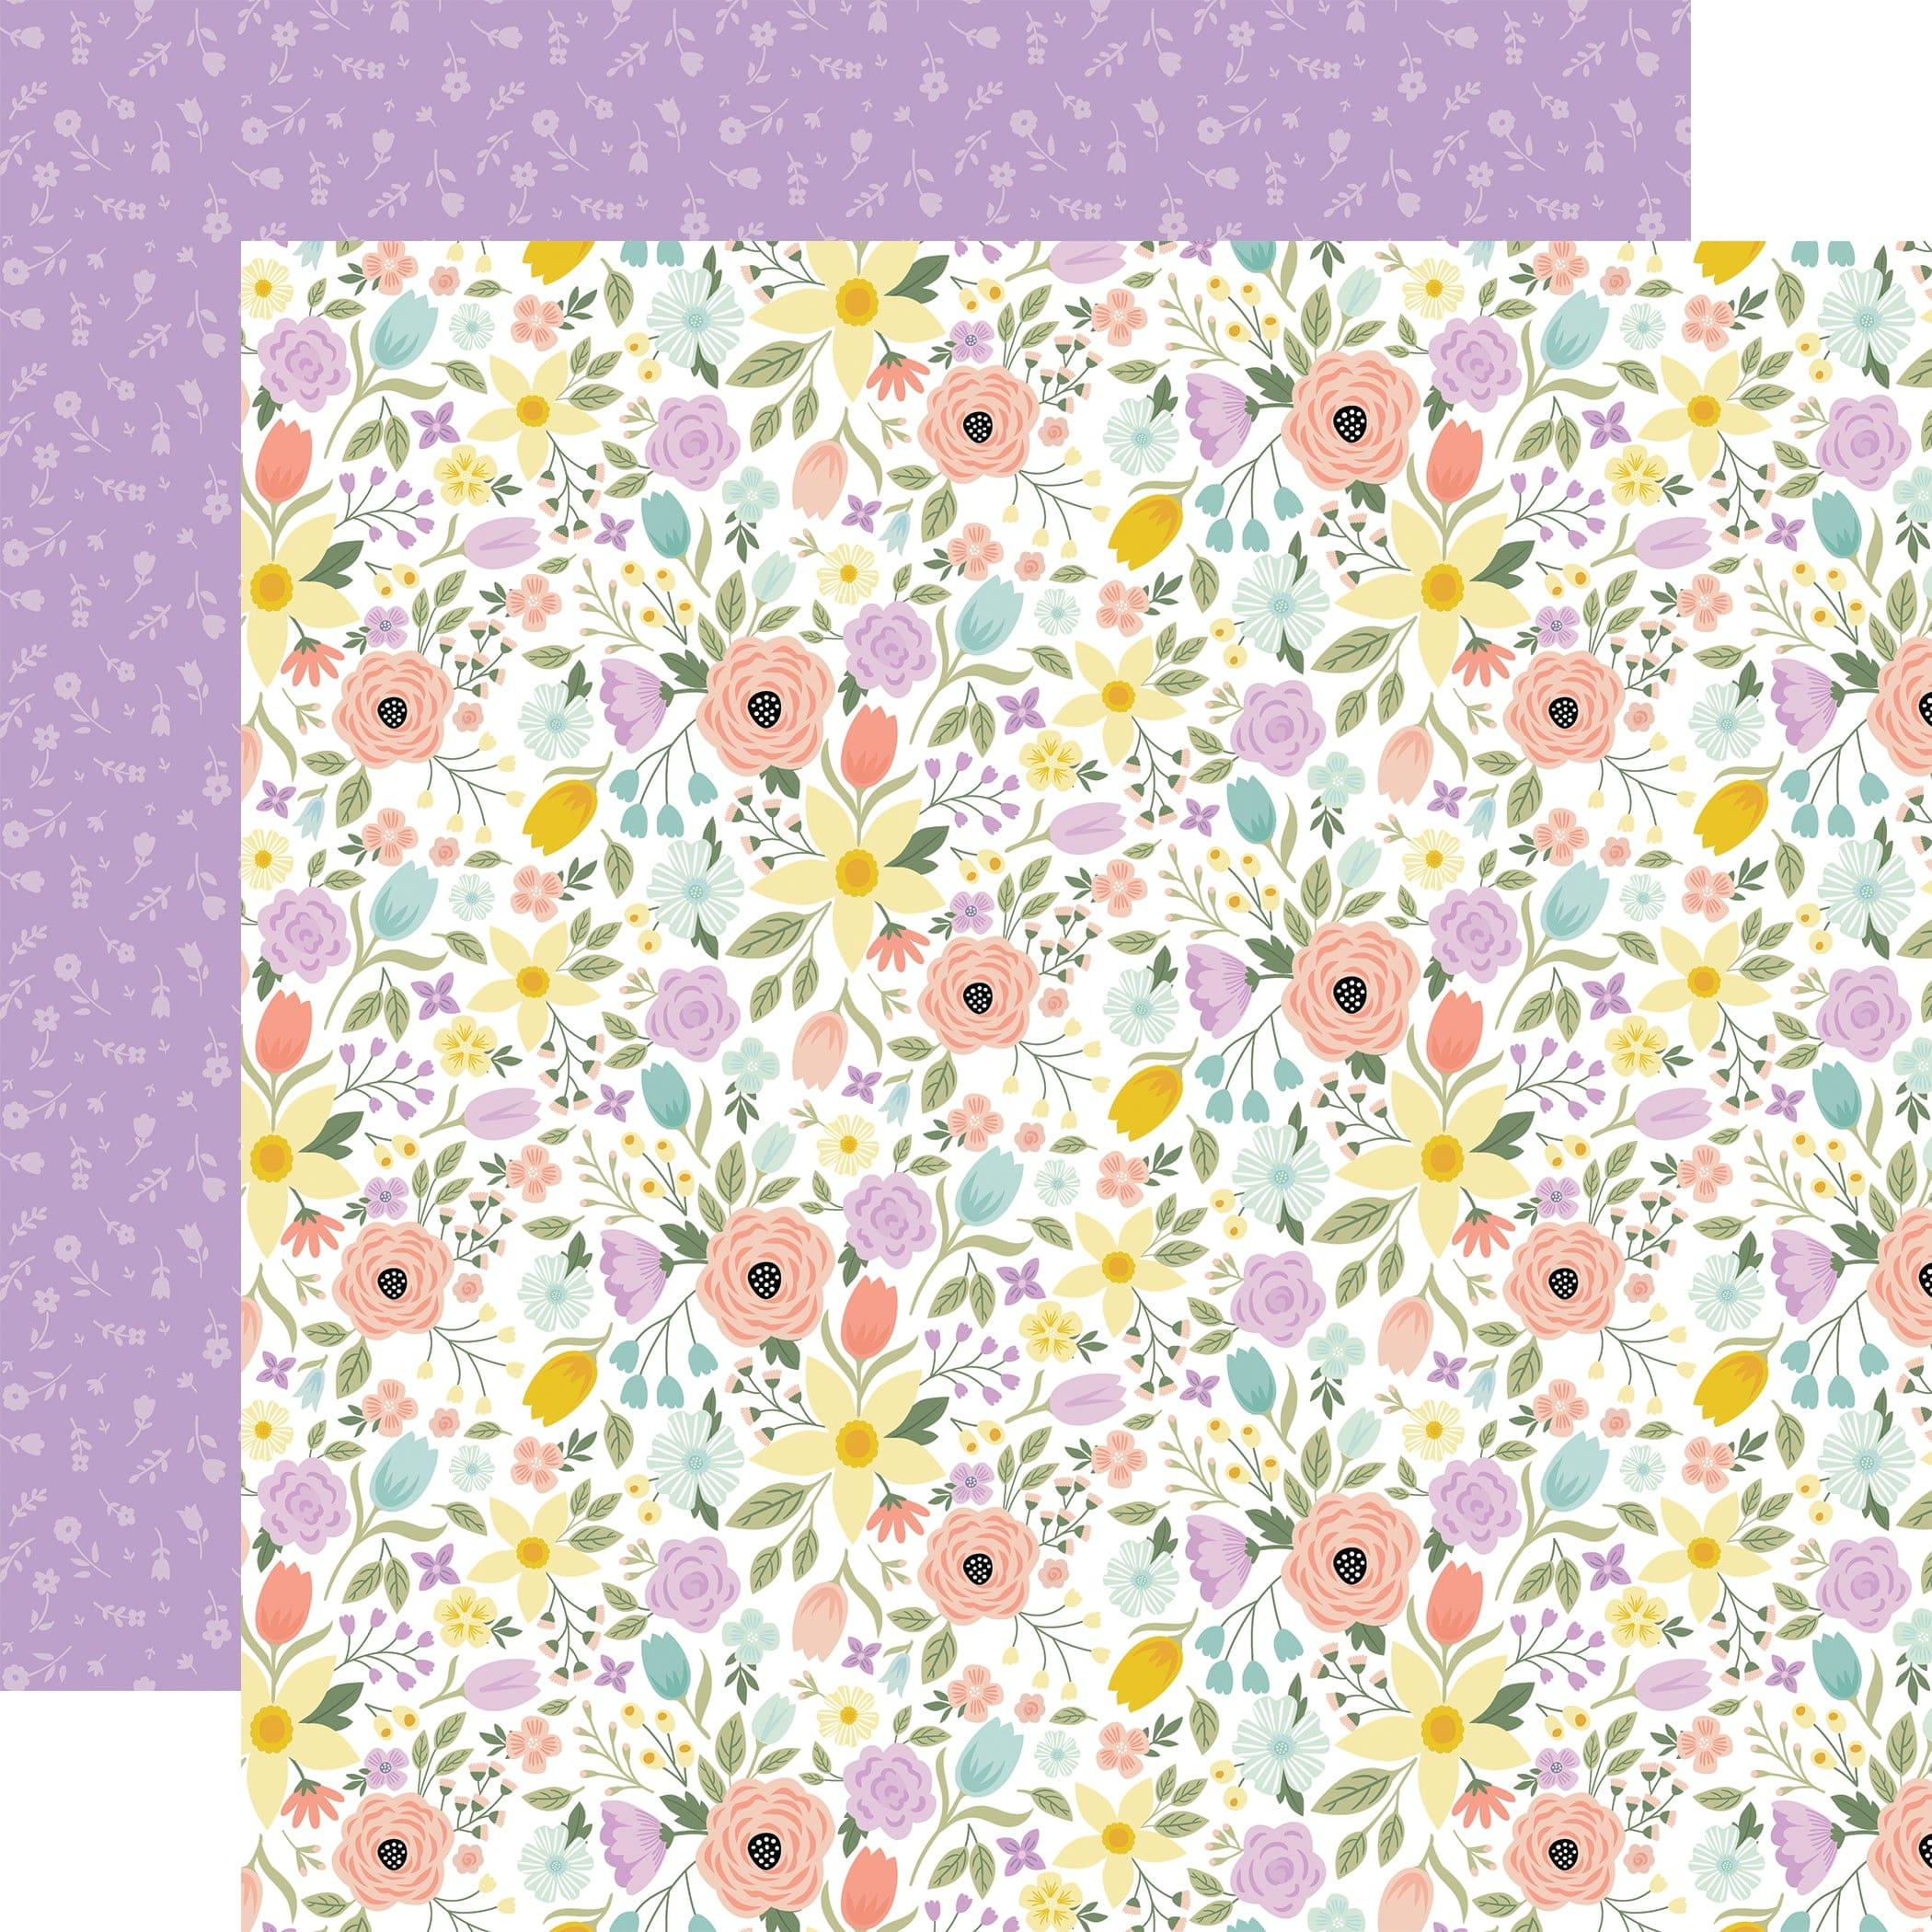 It's Easter Time Collection Blooming Blossoms 12 x 12 Double-Sided Scrapbook Paper by Echo Park Paper - Scrapbook Supply Companies